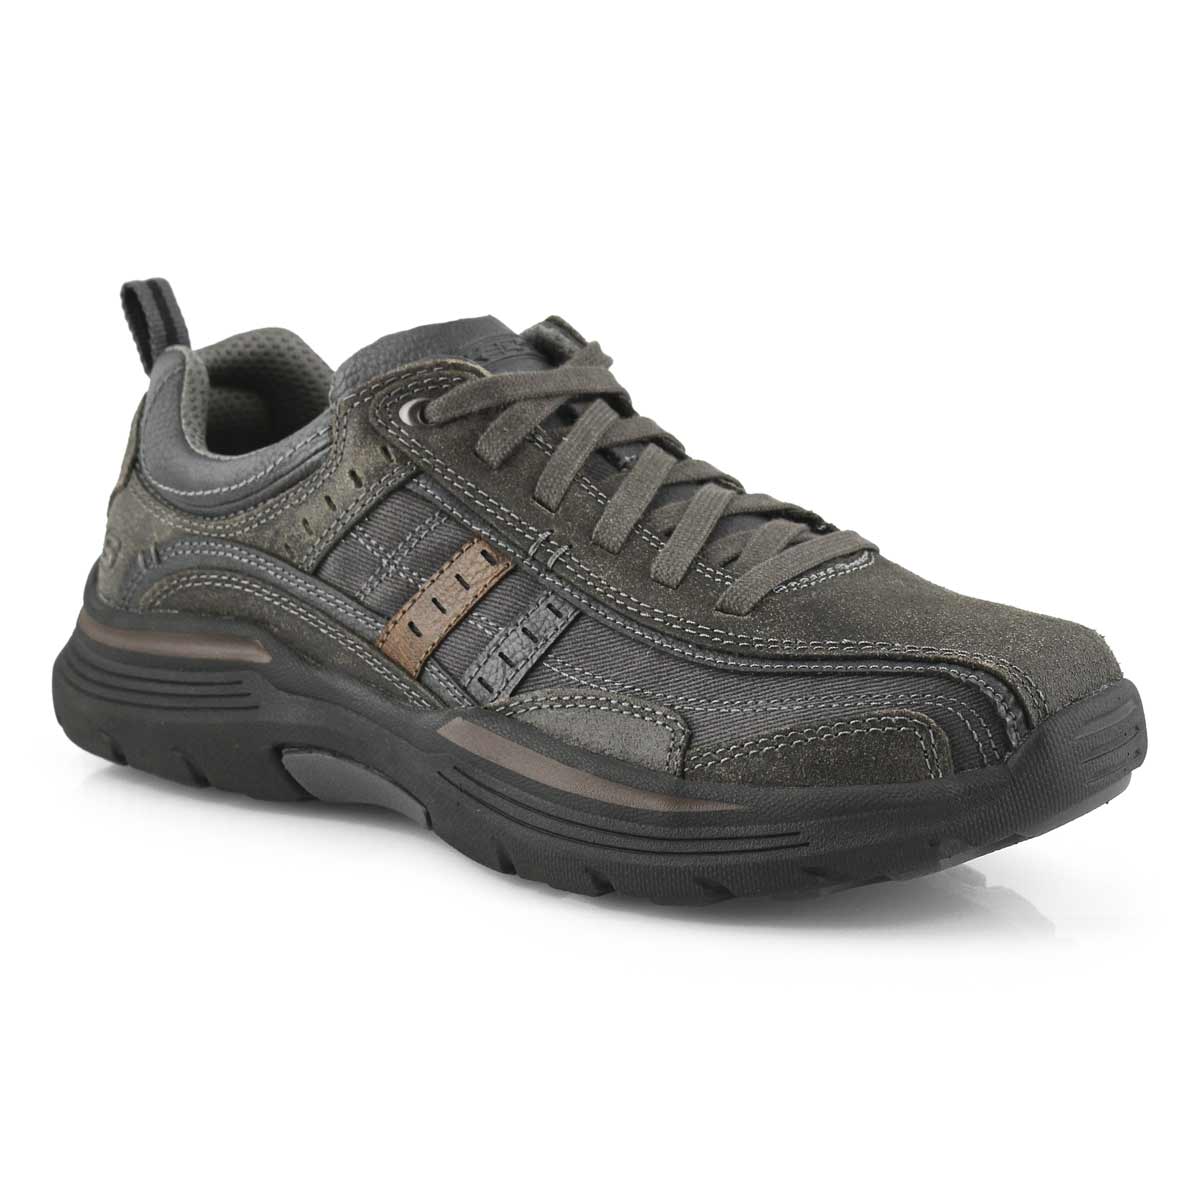 Skechers Men's Expended Manden Sneakers - Cha | SoftMoc.com